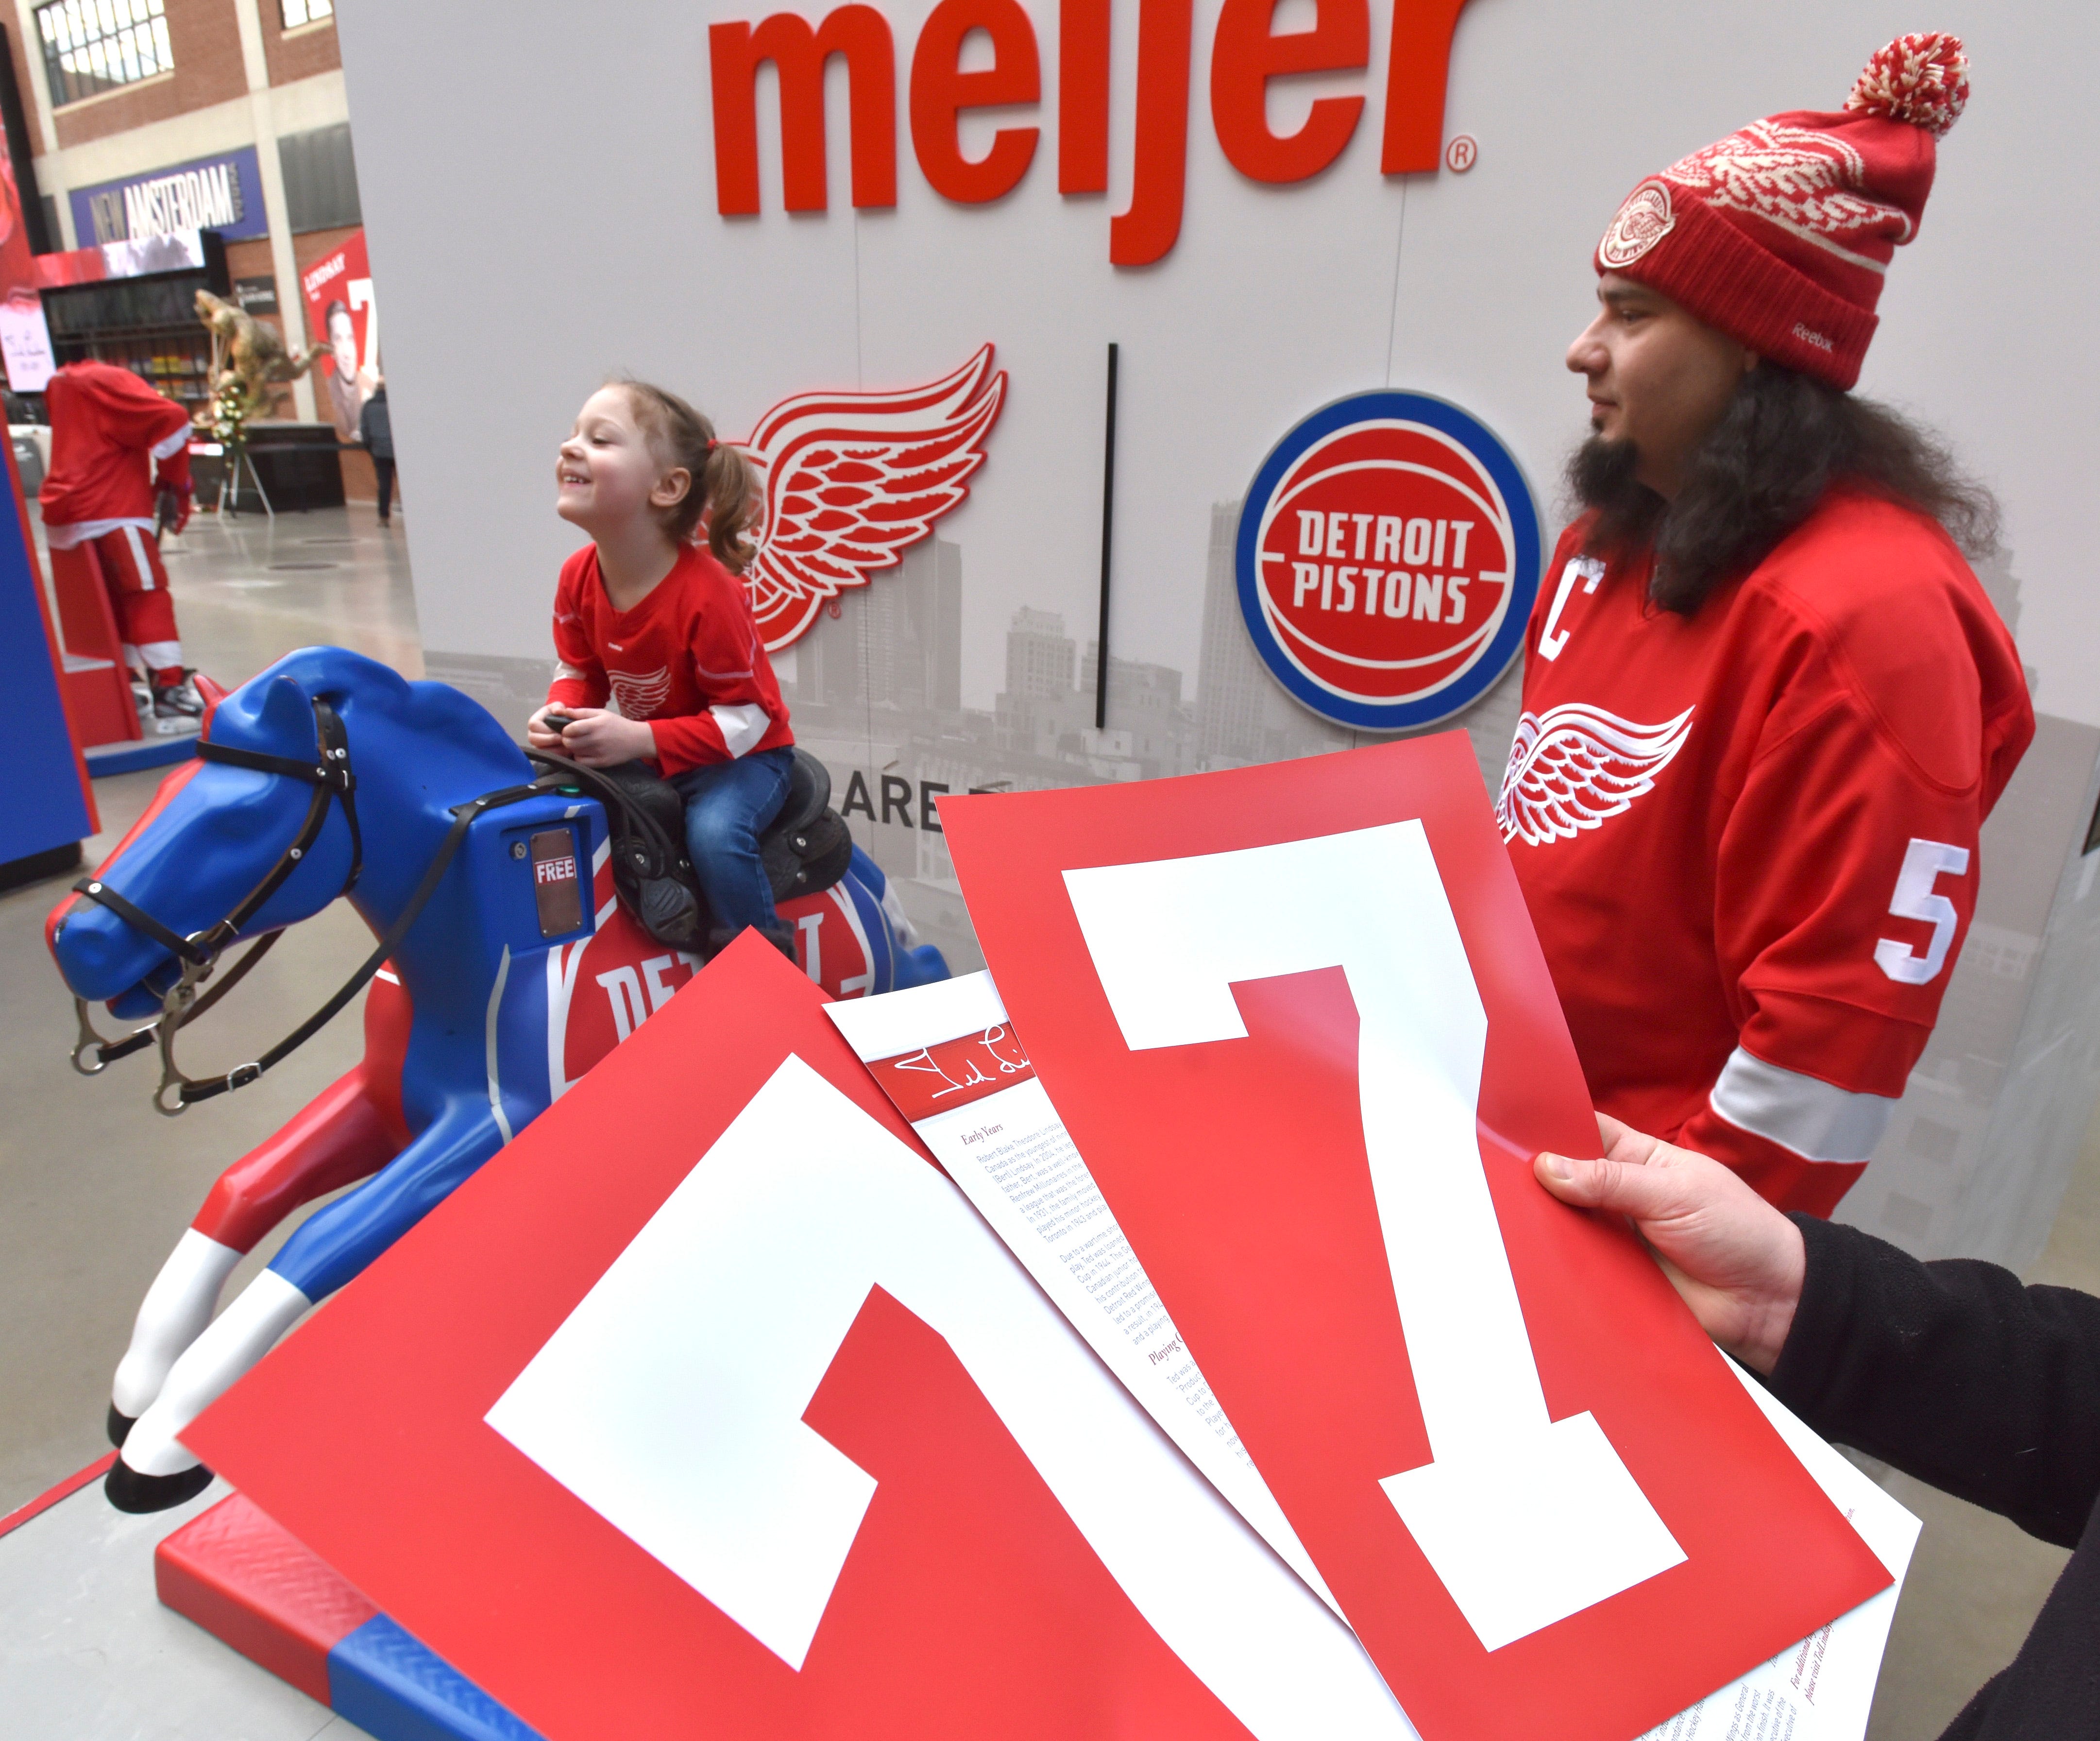 Nadea Lysyuk of Shelby Twp. shows off the #7 posters she and her family received after paying their respects to Ted Lindsay as her daughter, Kaylee Bommarito, 4, rides a mechanical horse near the Meijer entrance. Like many fans, husband Nick Bommarito wore his Red Wings gear.